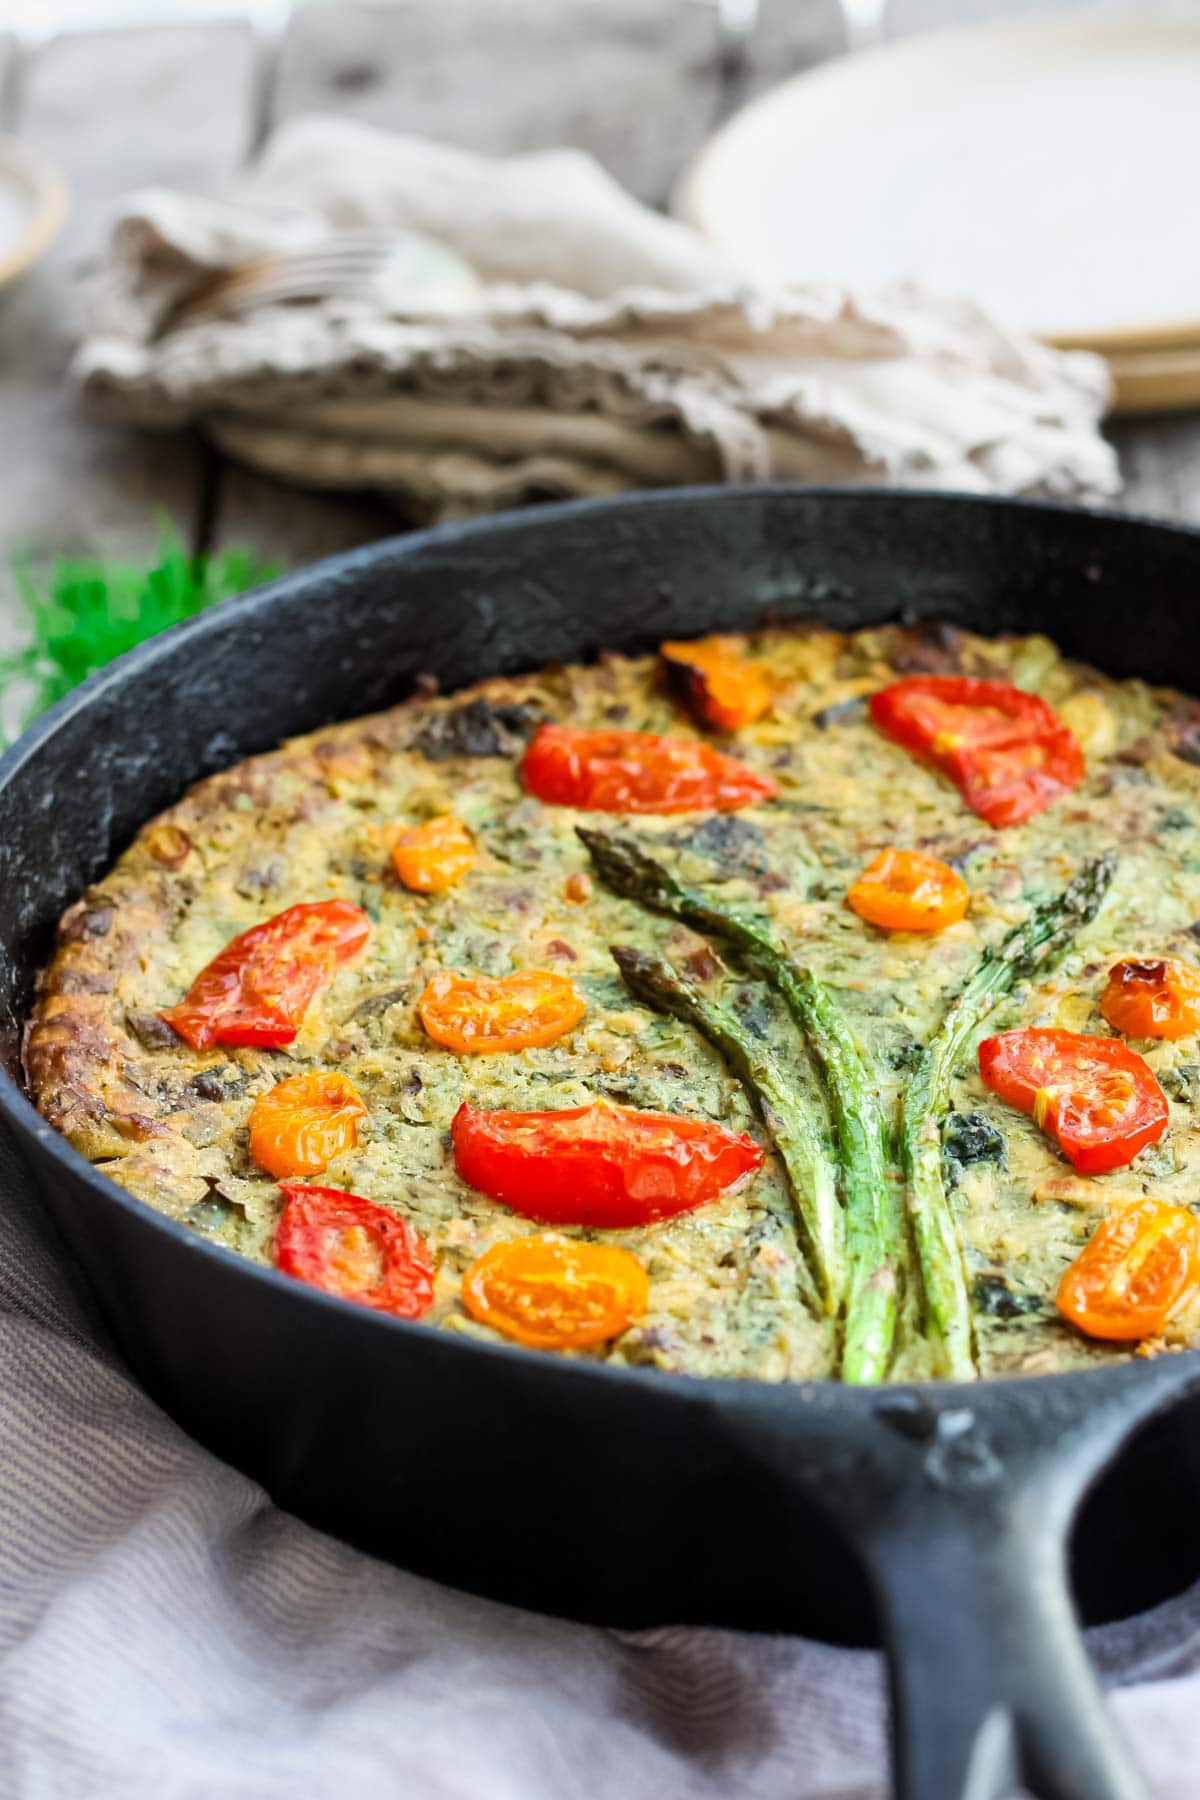 This Vegan Frittata recipe celebrates the flourishing greenness of springtime. Stocked up with fresh herbs, leeks, asparagus, and a creamy chickpea flour filling, it's delicious!This Vegan Frittata recipe celebrates the flourishing greenness of springtime. Stocked up with fresh herbs, leeks, asparagus, and a creamy chickpea flour filling, it's delicious!